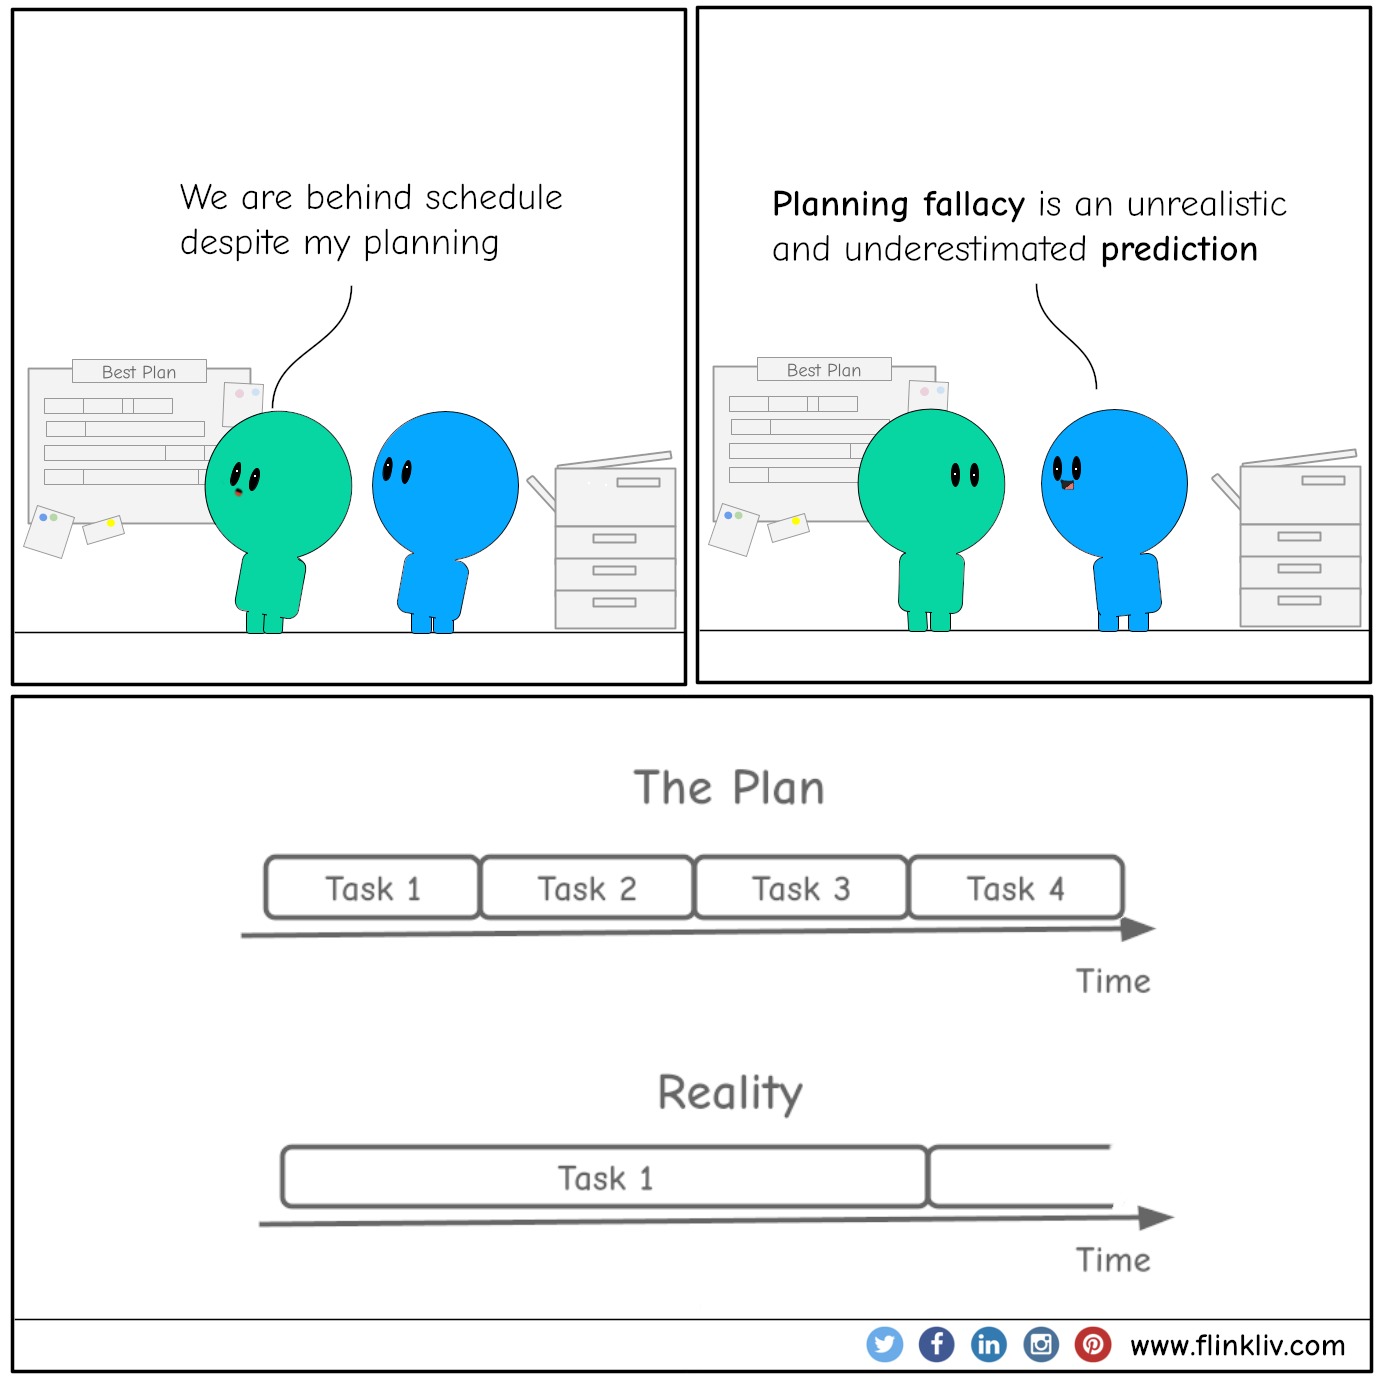 Conversation between A and B about planning fallacy. A: We are behind schedule despite my planning. B: Planning fallacy is an unrealistic and underestimated prediction. By flinkliv.com